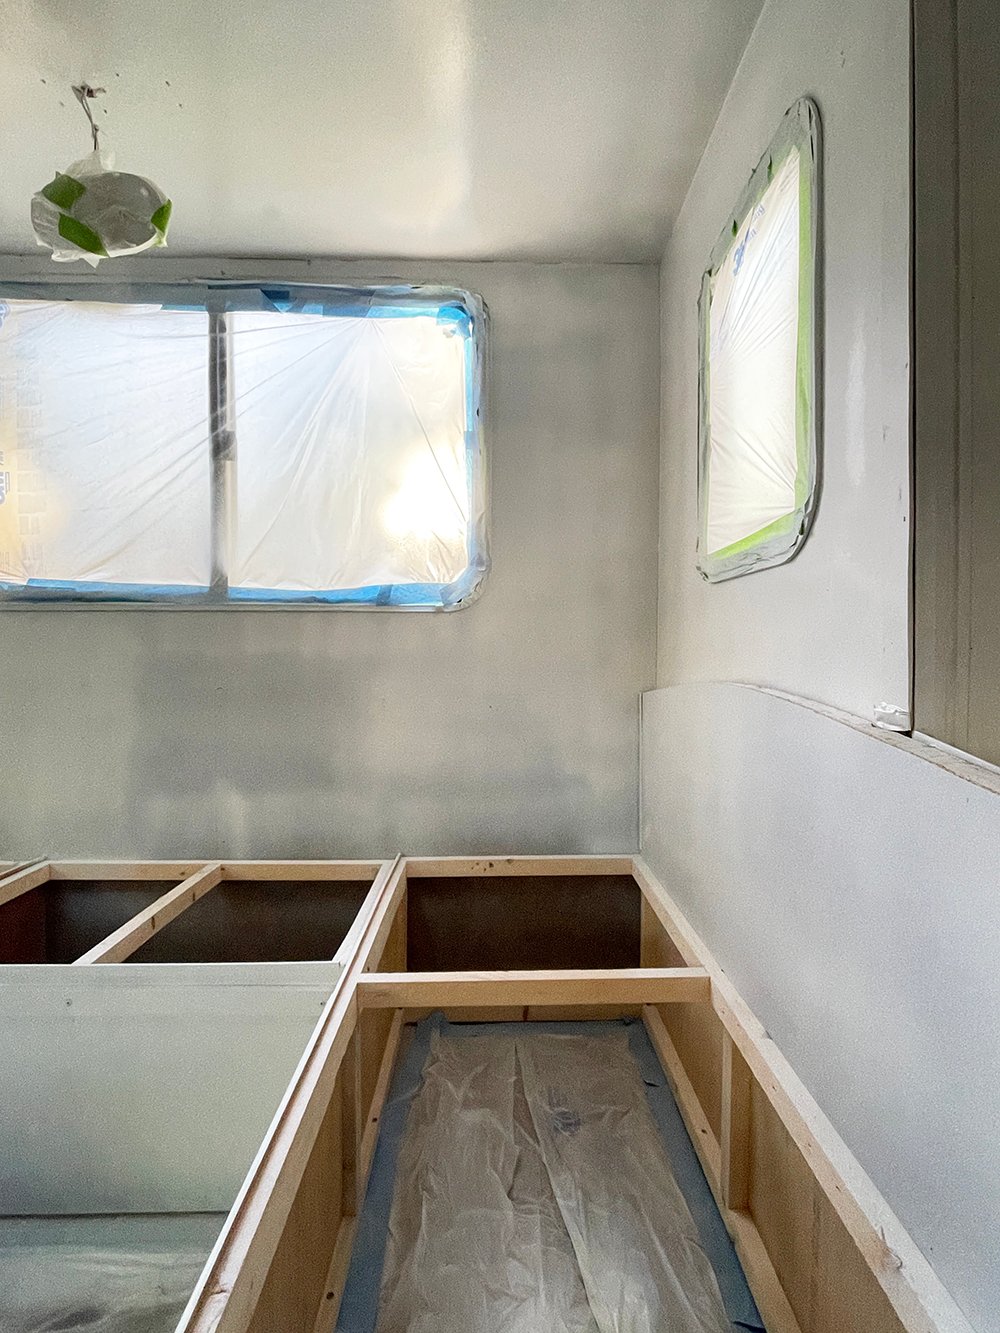 A Quick Camper Makeover Update - roomfortuesday.com